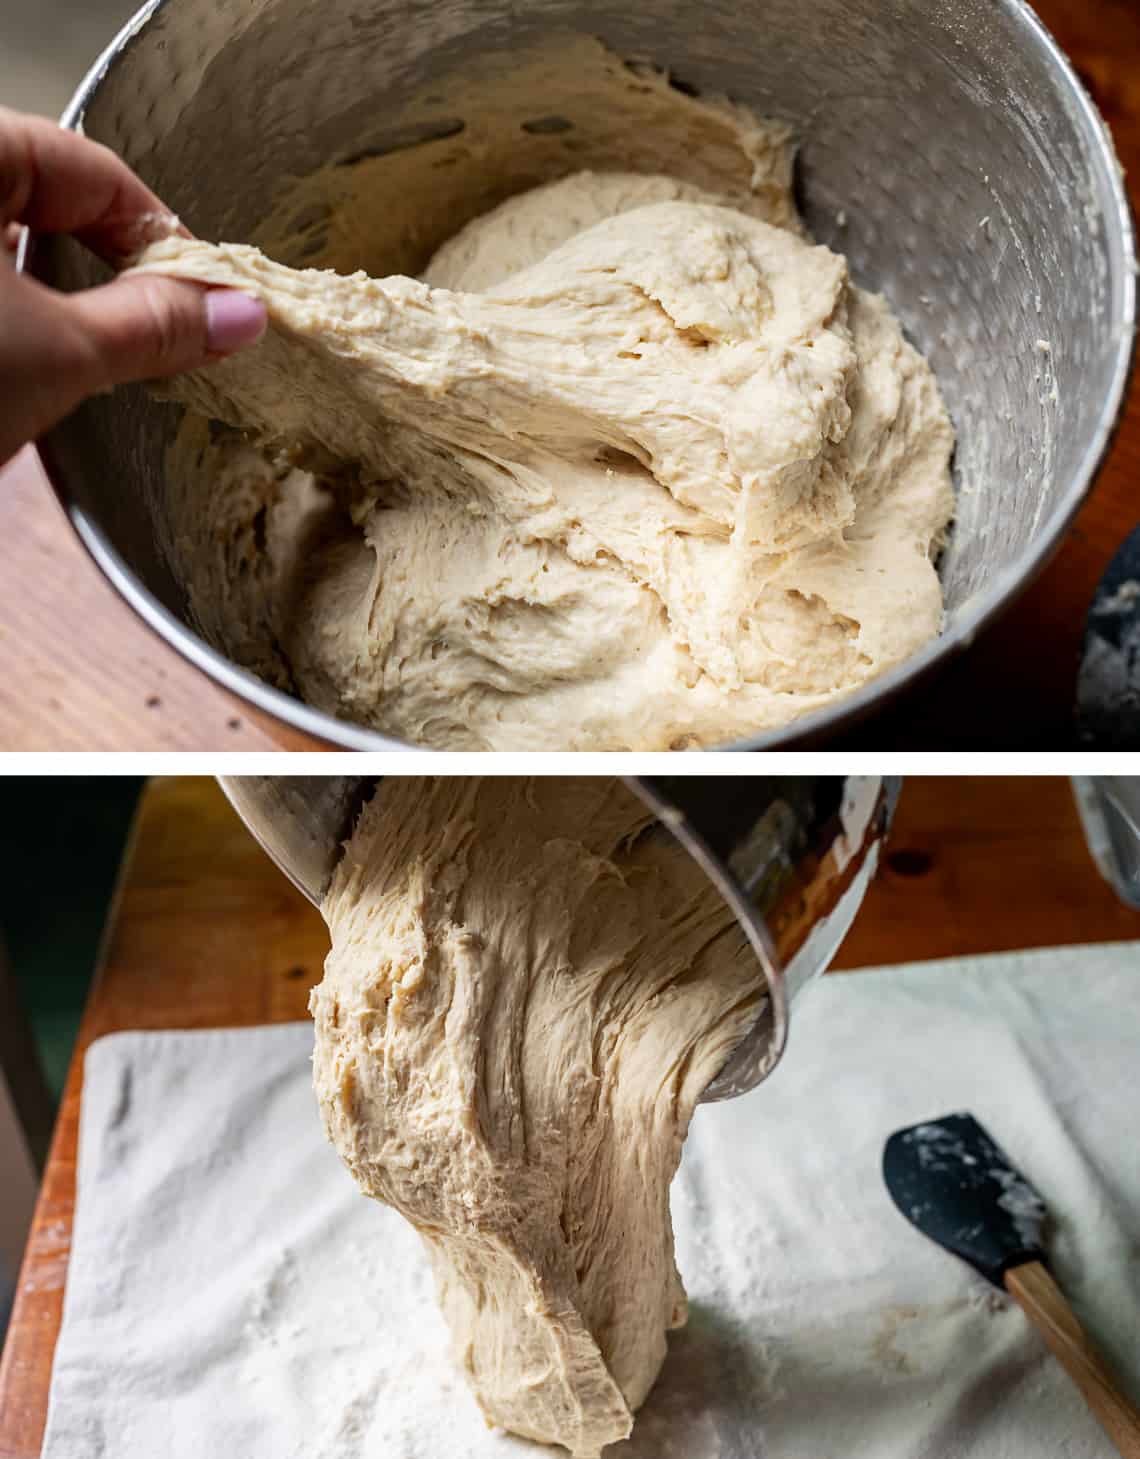 top showing the stretchiness of the dough, bottom pouting the dough out to knead.